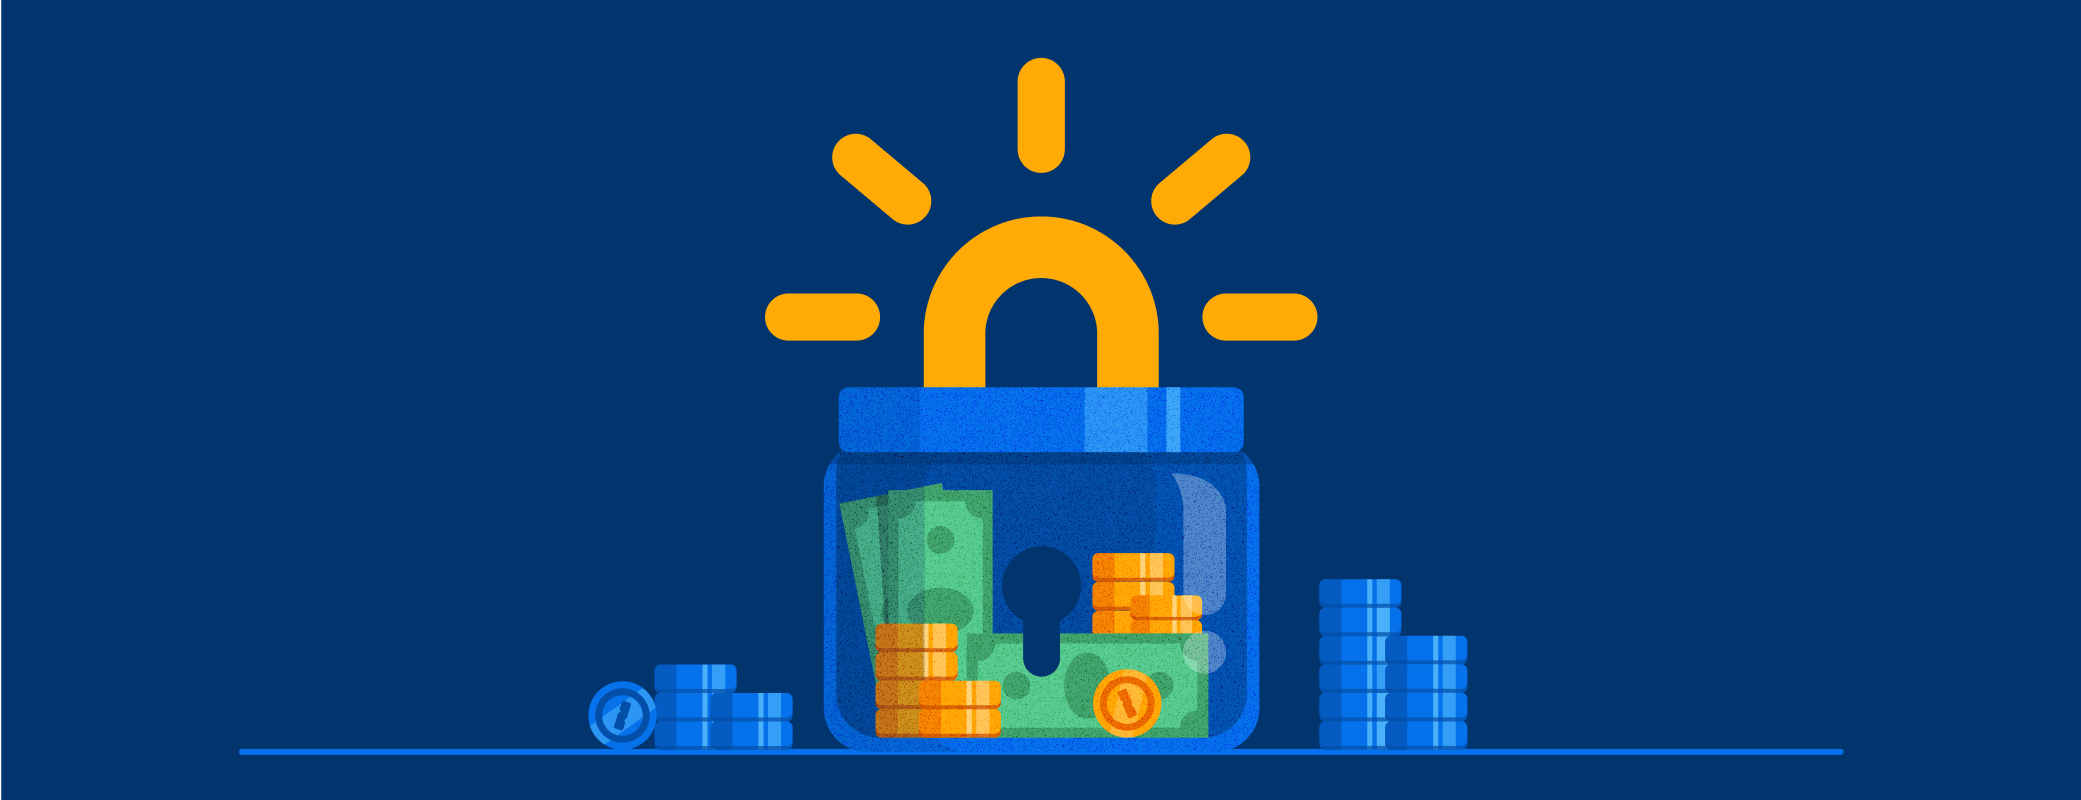 Together we’ve raised more than $75,000 for Let’s Encrypt